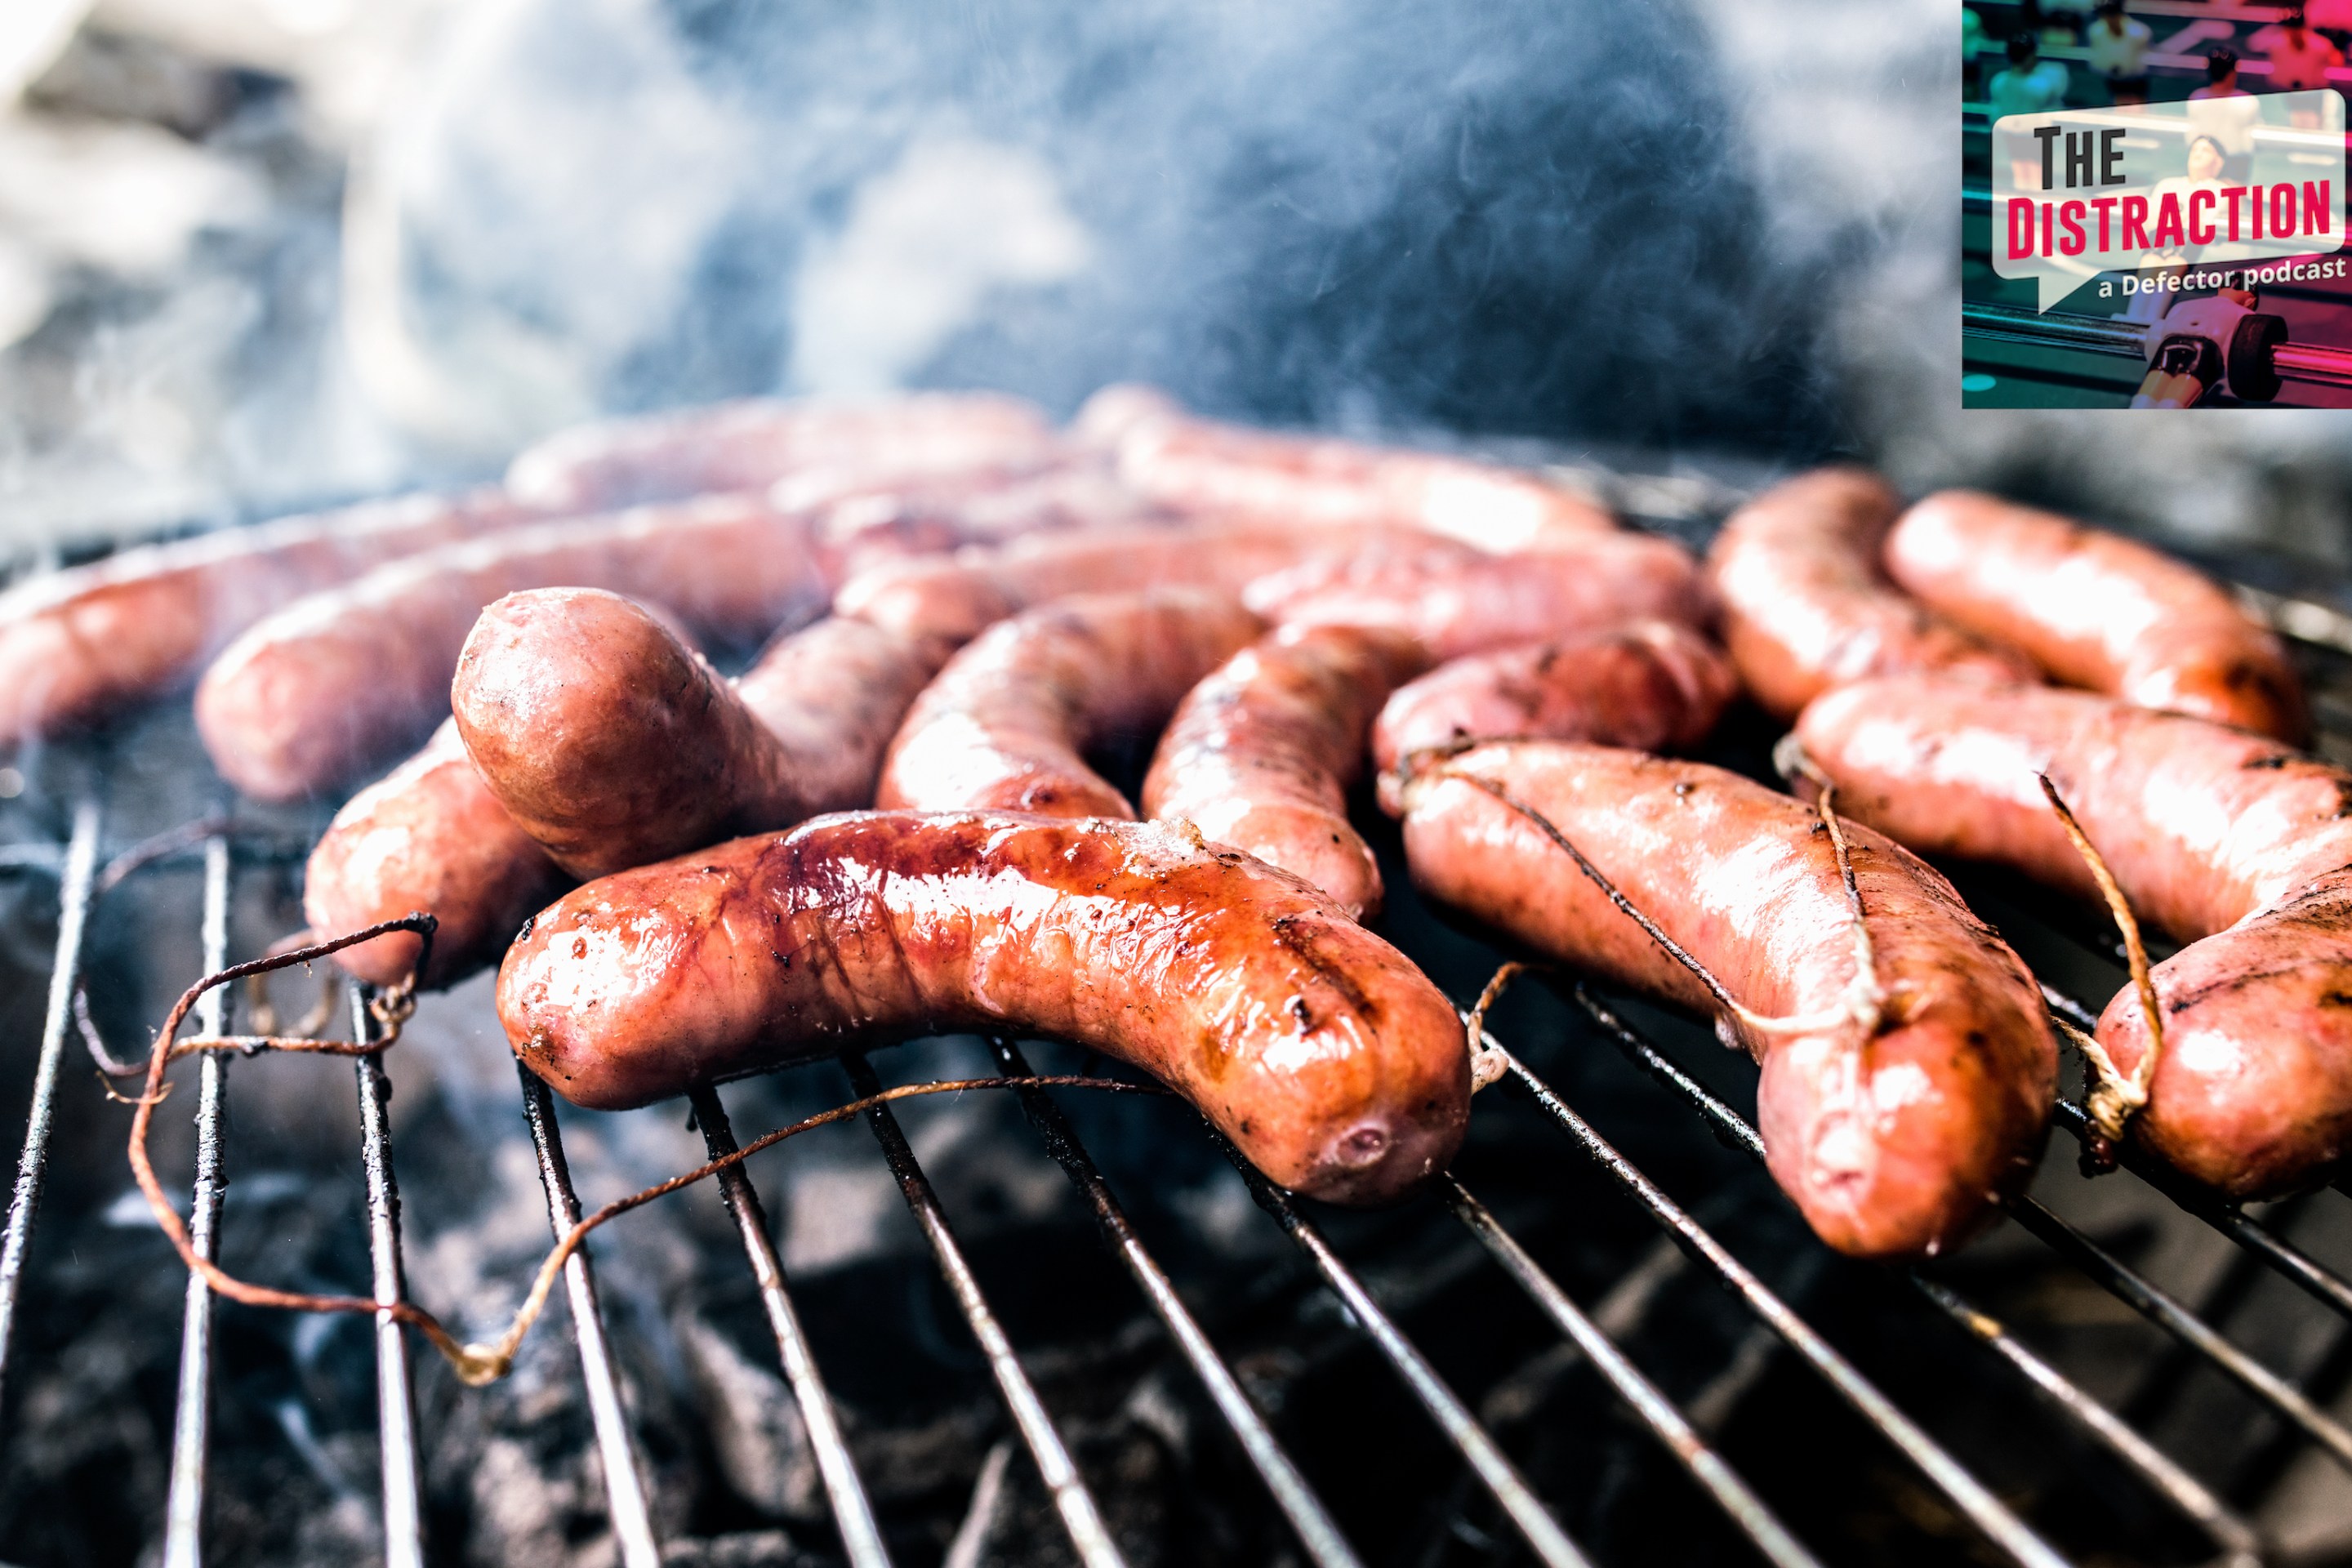 A stock photo of sausages cooking on a barbecue grill.